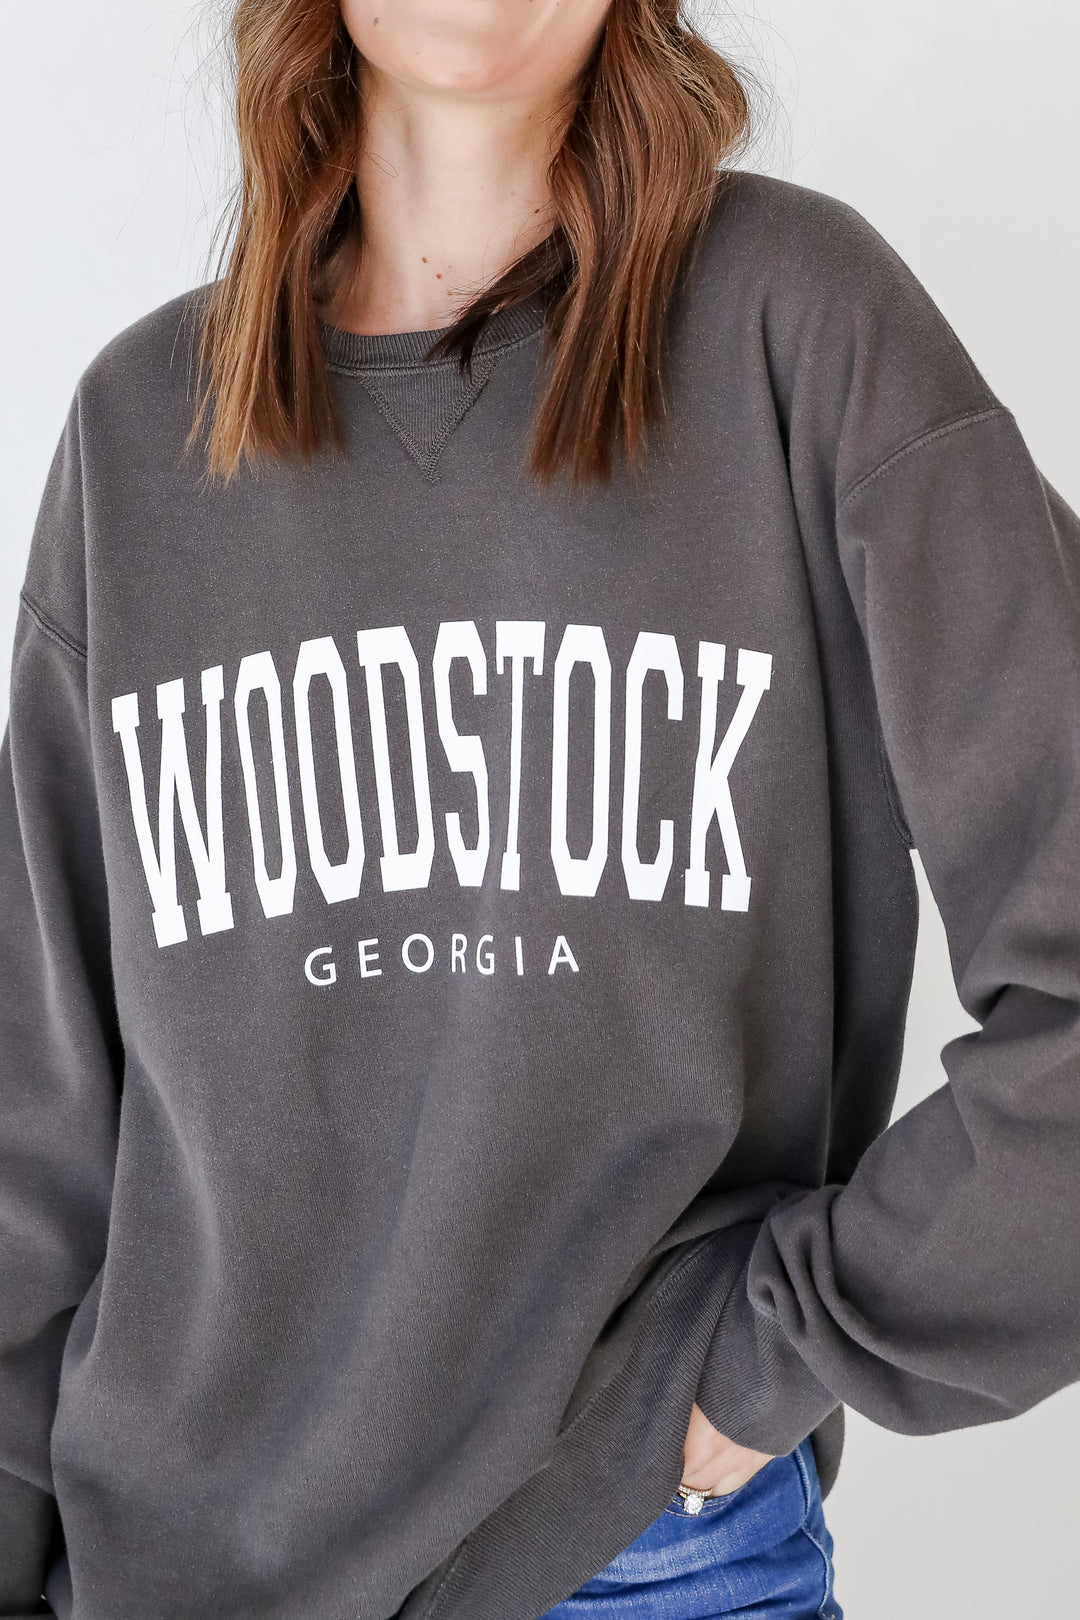 Woodstock Georgia Pullover from dress up